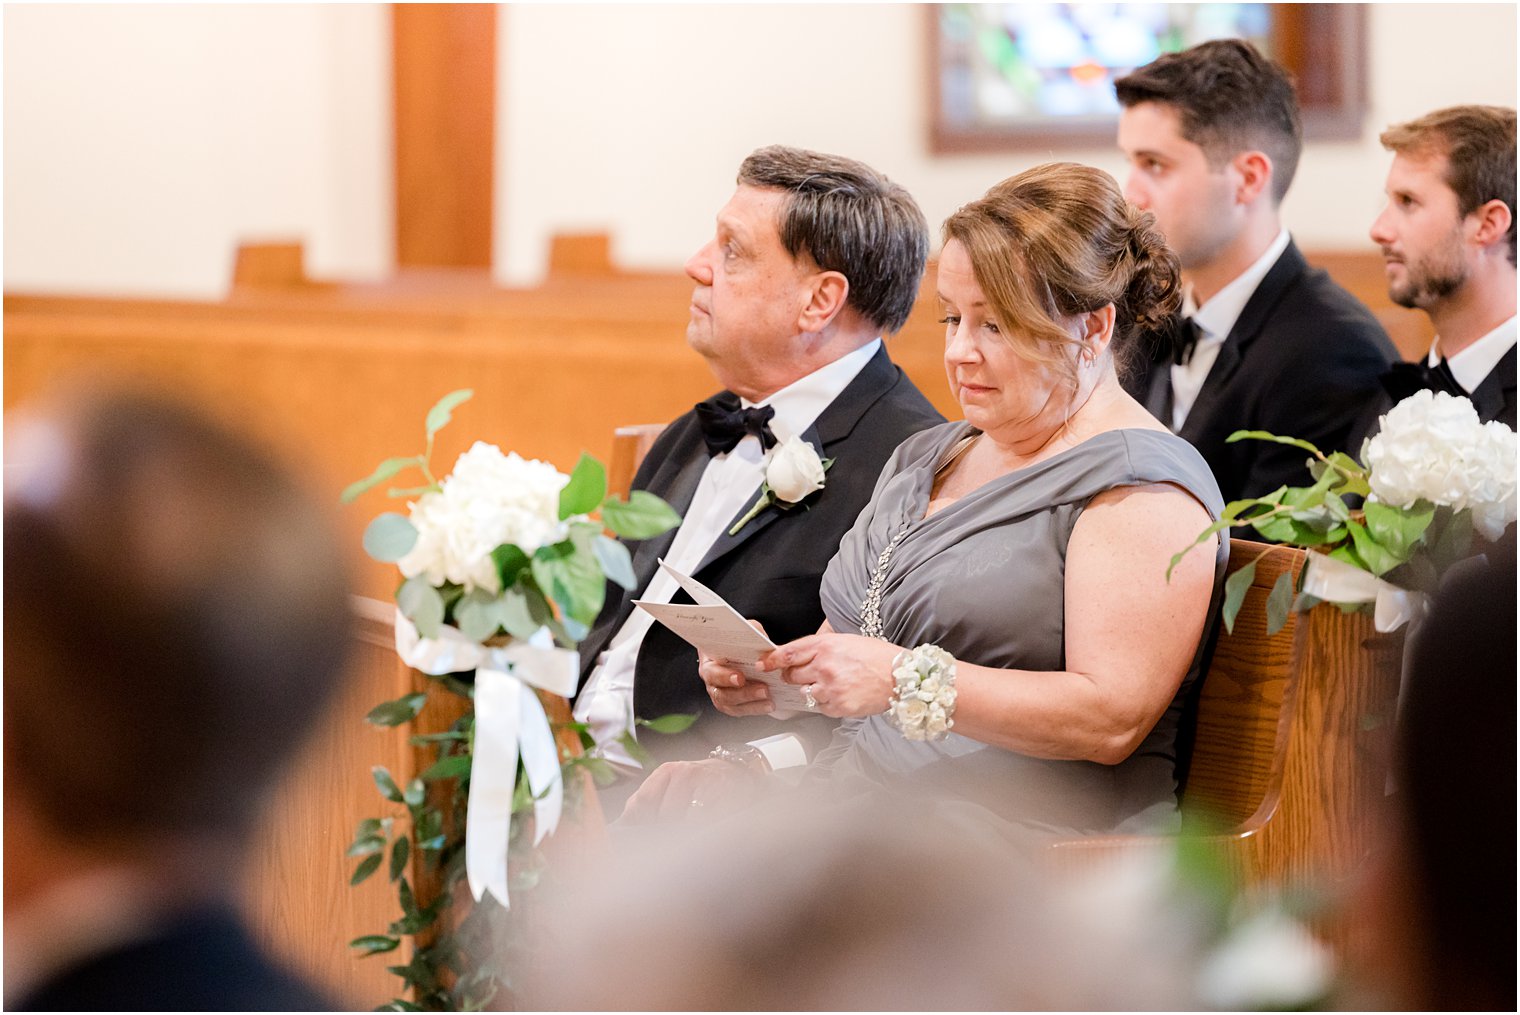 mother reads program during traditional church wedding ceremony in New Jersey